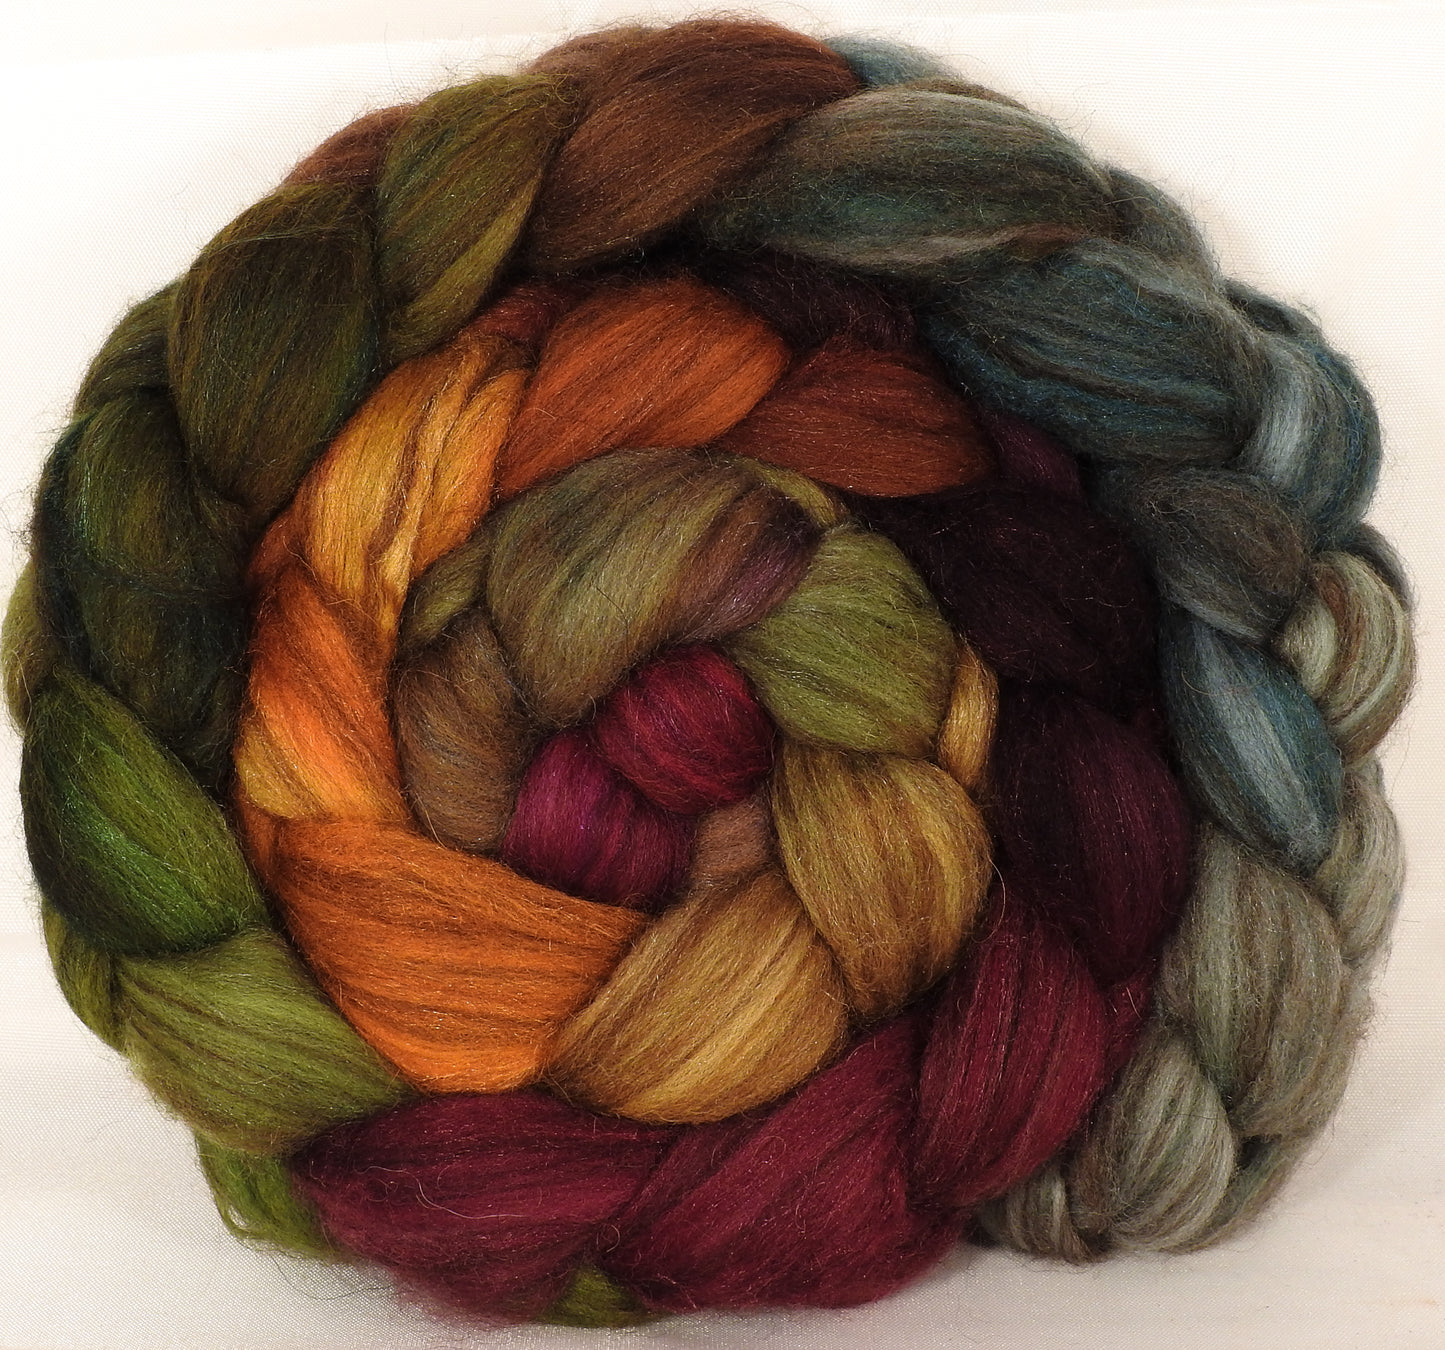 Hand dyed top for spinning -Farm Stand- 18.5 mic merino/ camel/ brown alpaca/ mulberry silk/ (40/20/20/20) - Inglenook Fibers